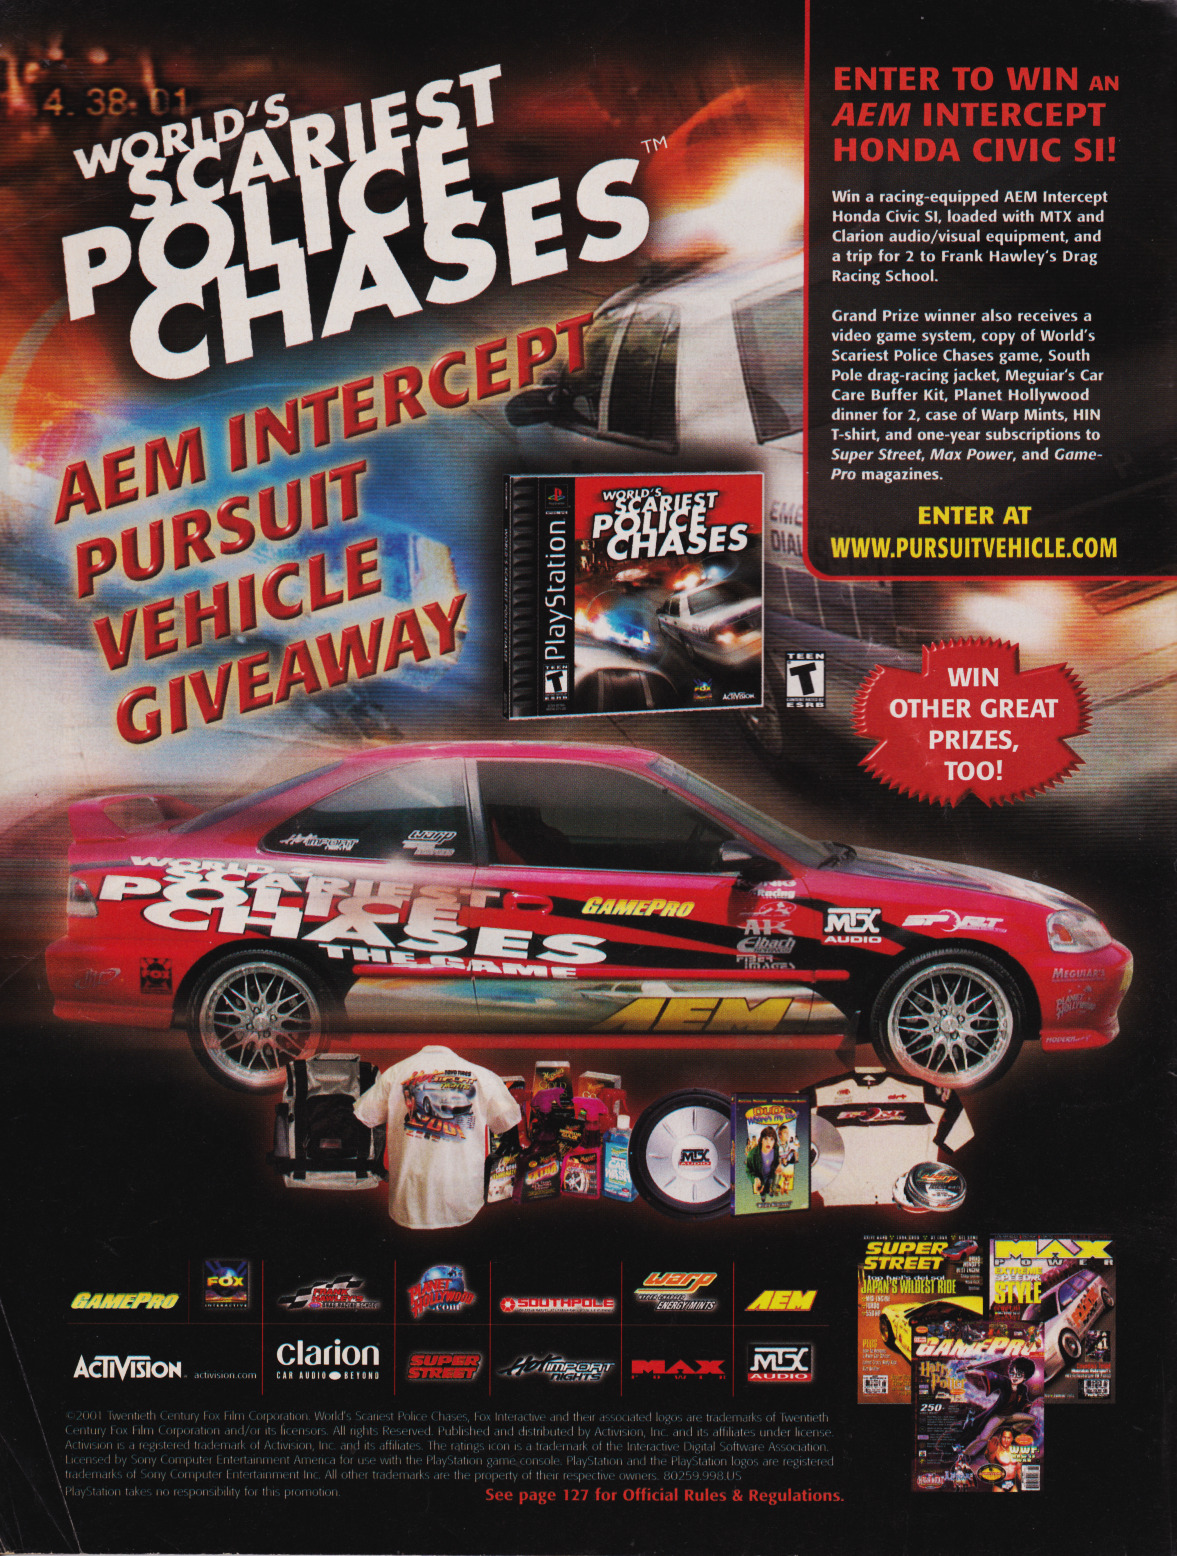 Video Game Print Ads — “World’s Scariest Police Chases” [Contest]